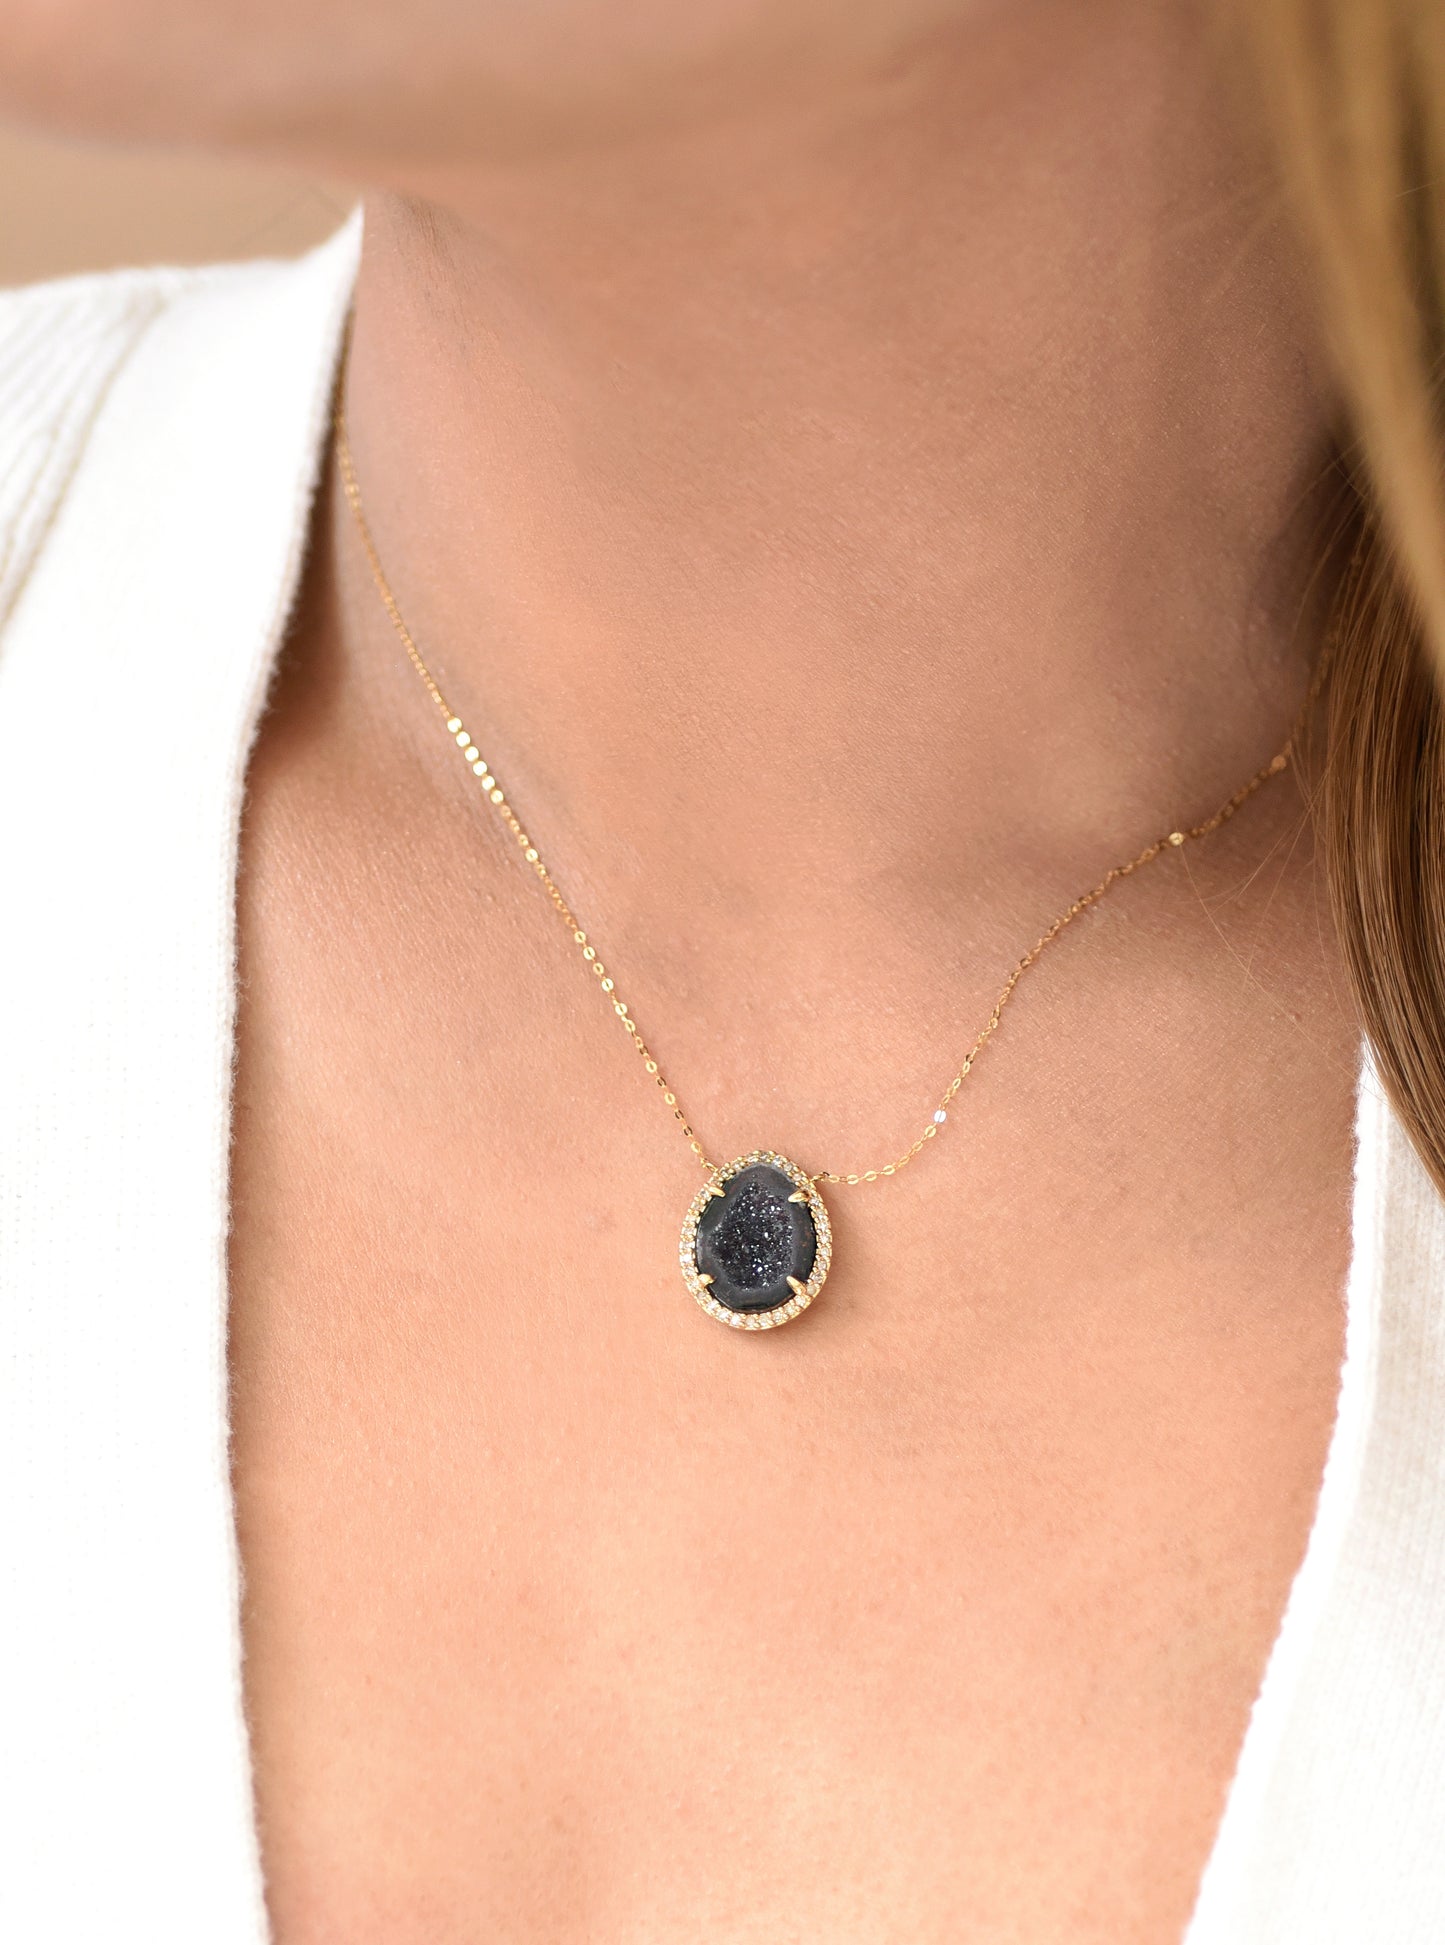 18k Gold Geode Necklace with Diamond